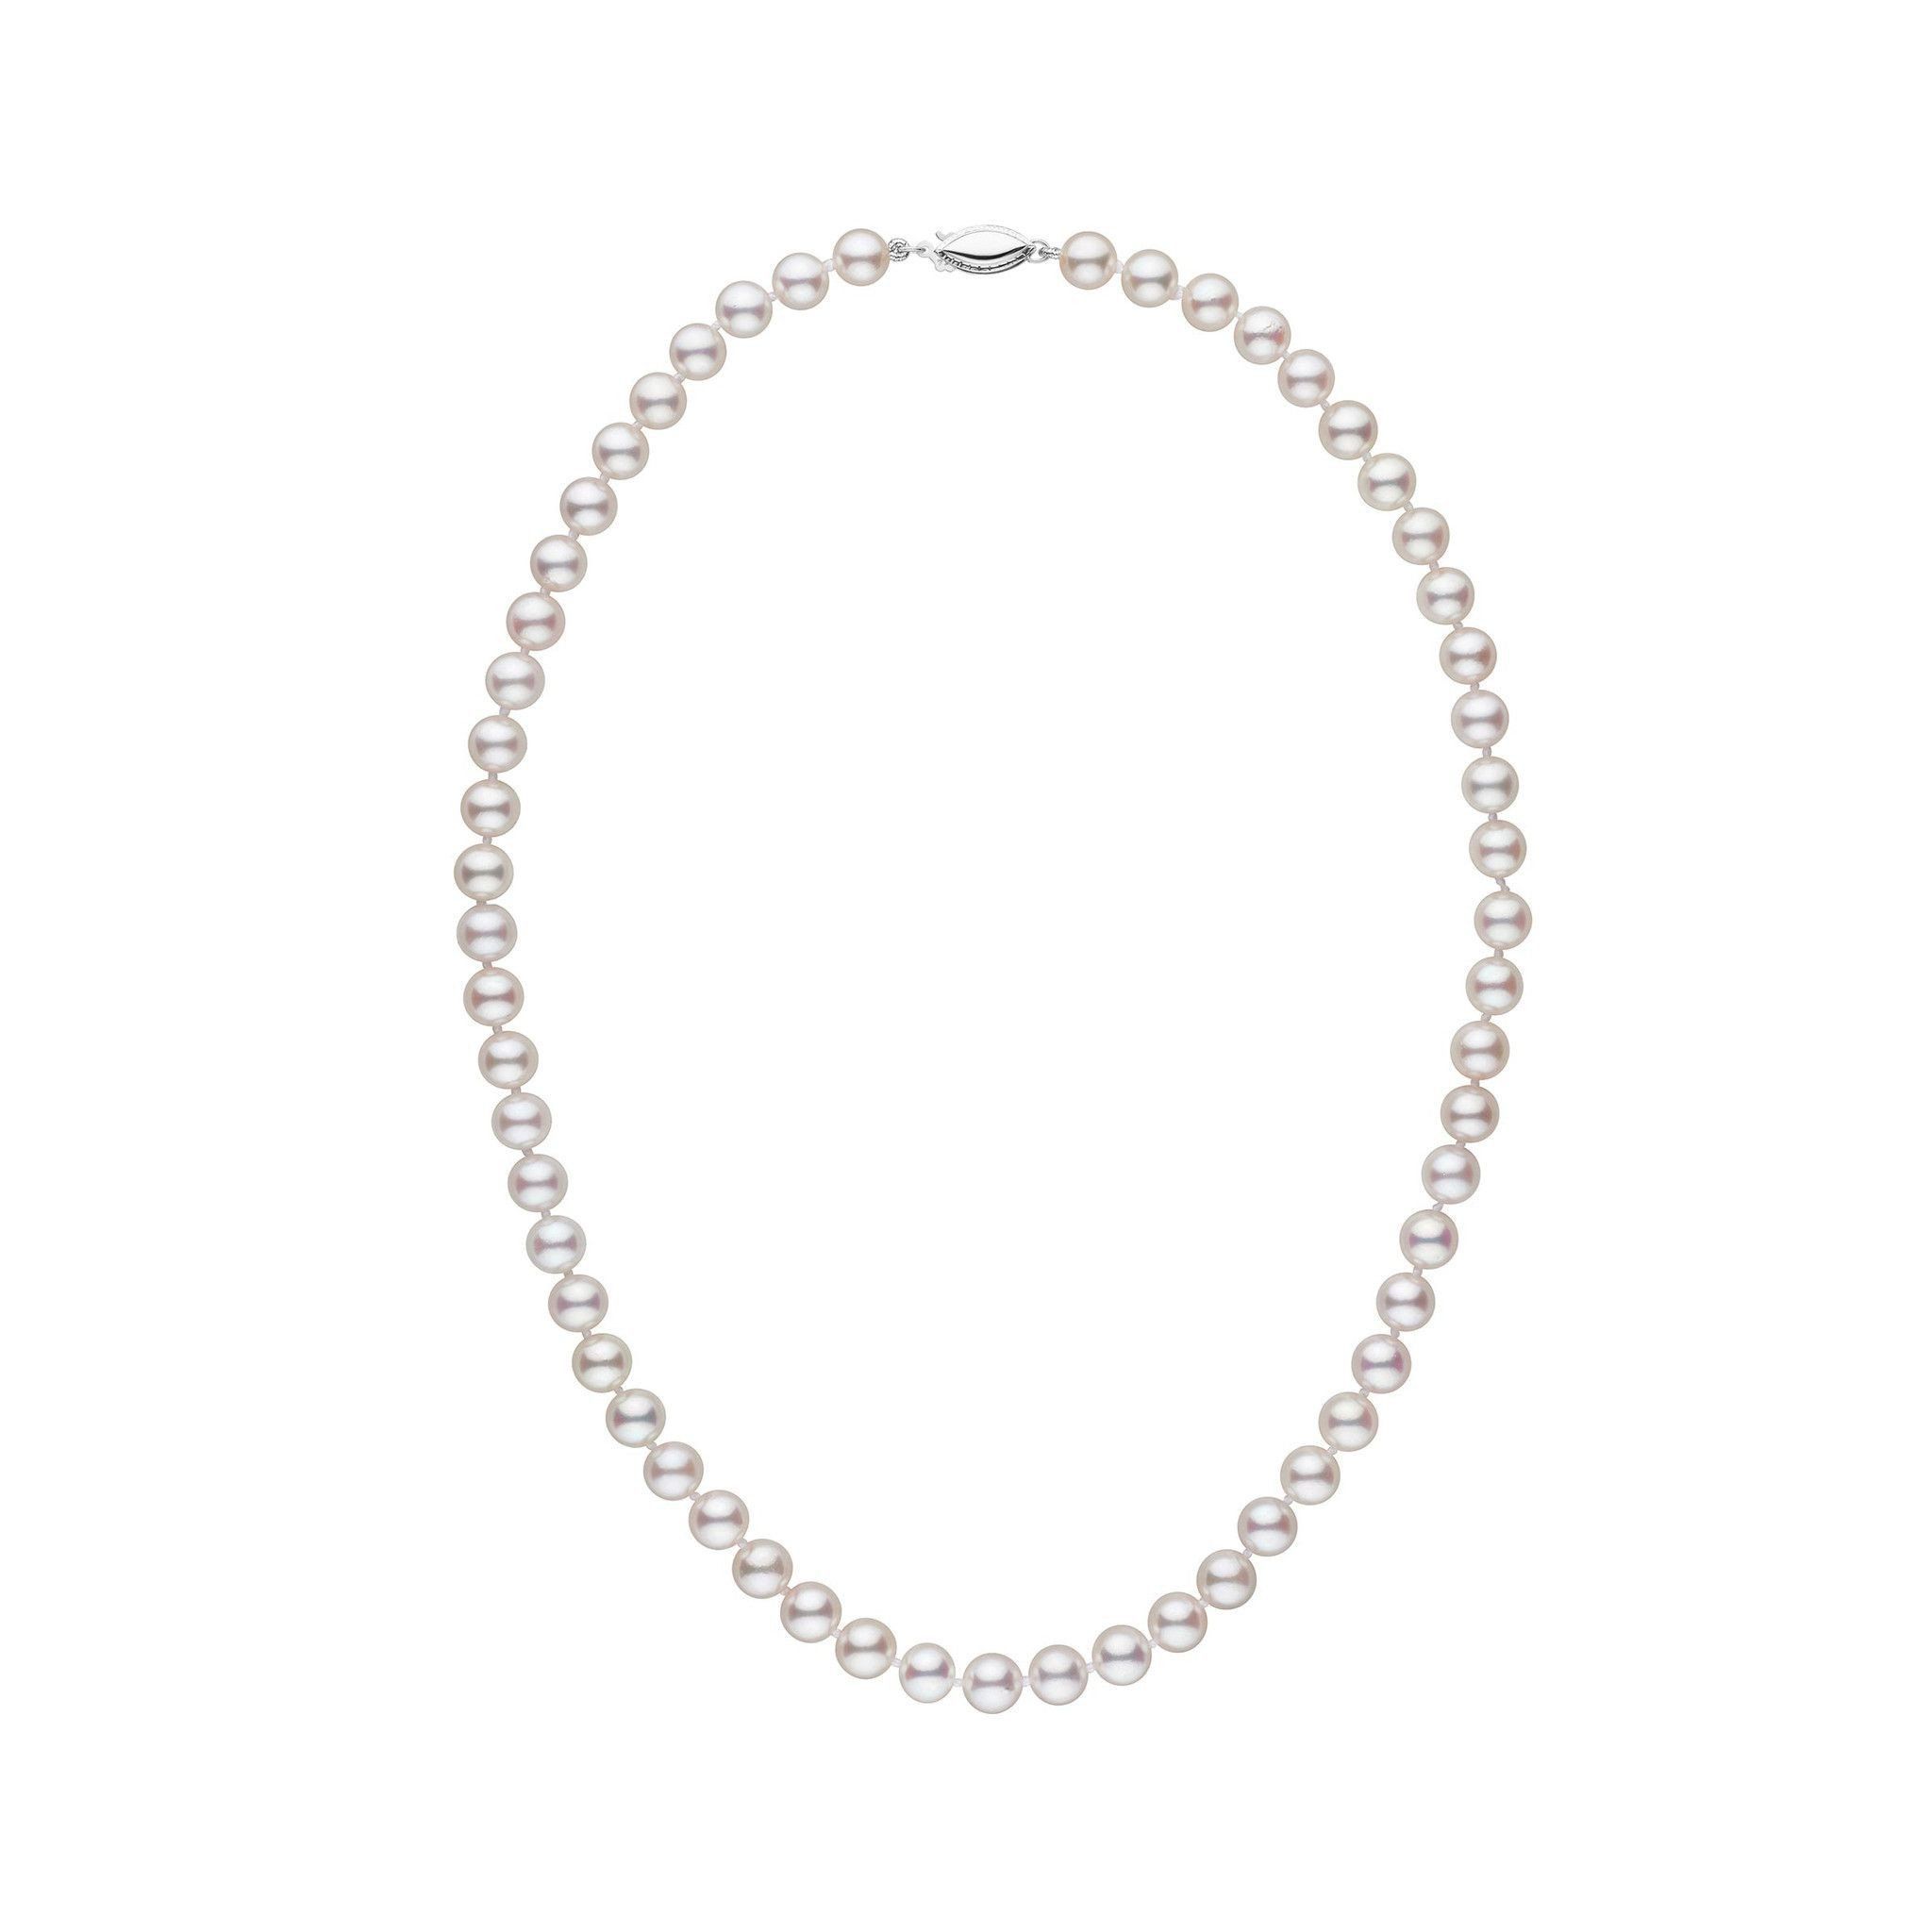 6.5-7.0 mm 16 Inch AAA White Akoya Pearl Necklace White Gold